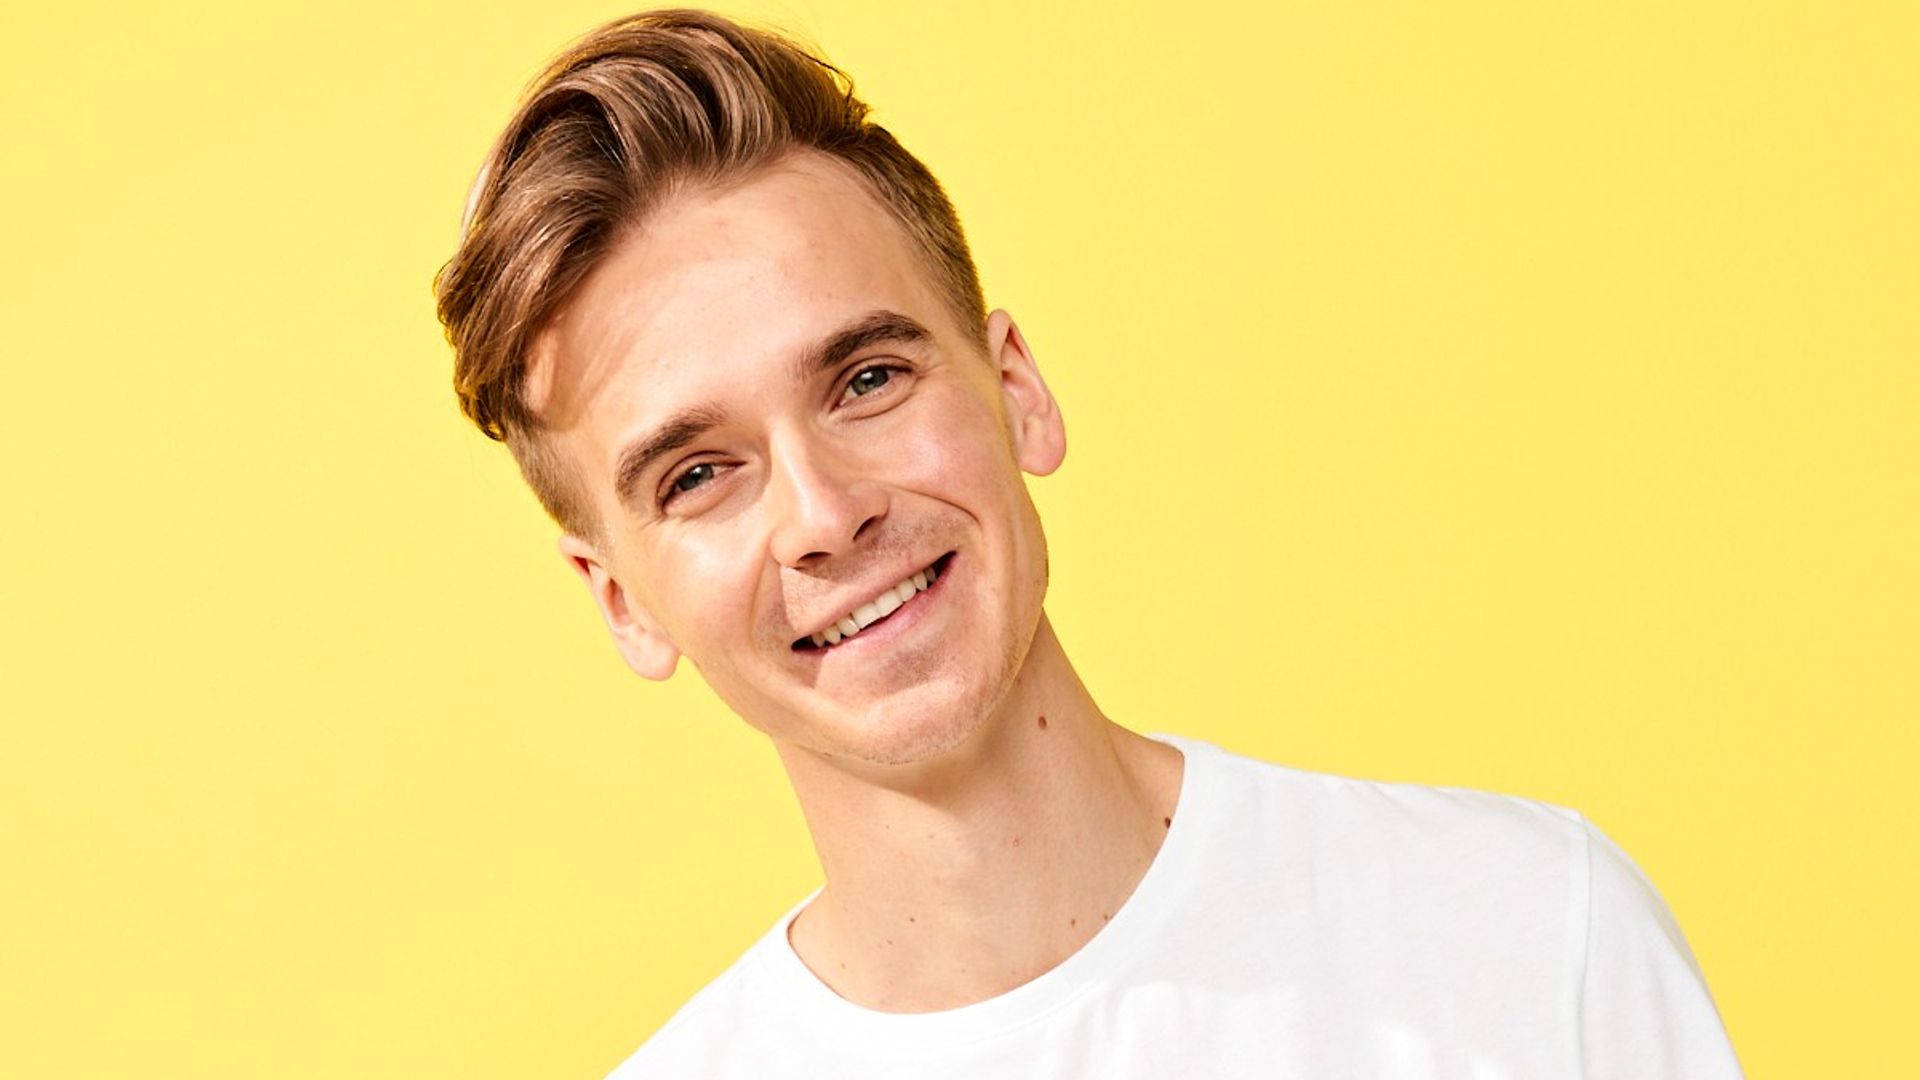 Joe Sugg delights fans with baby bump photo ahead of new arrival